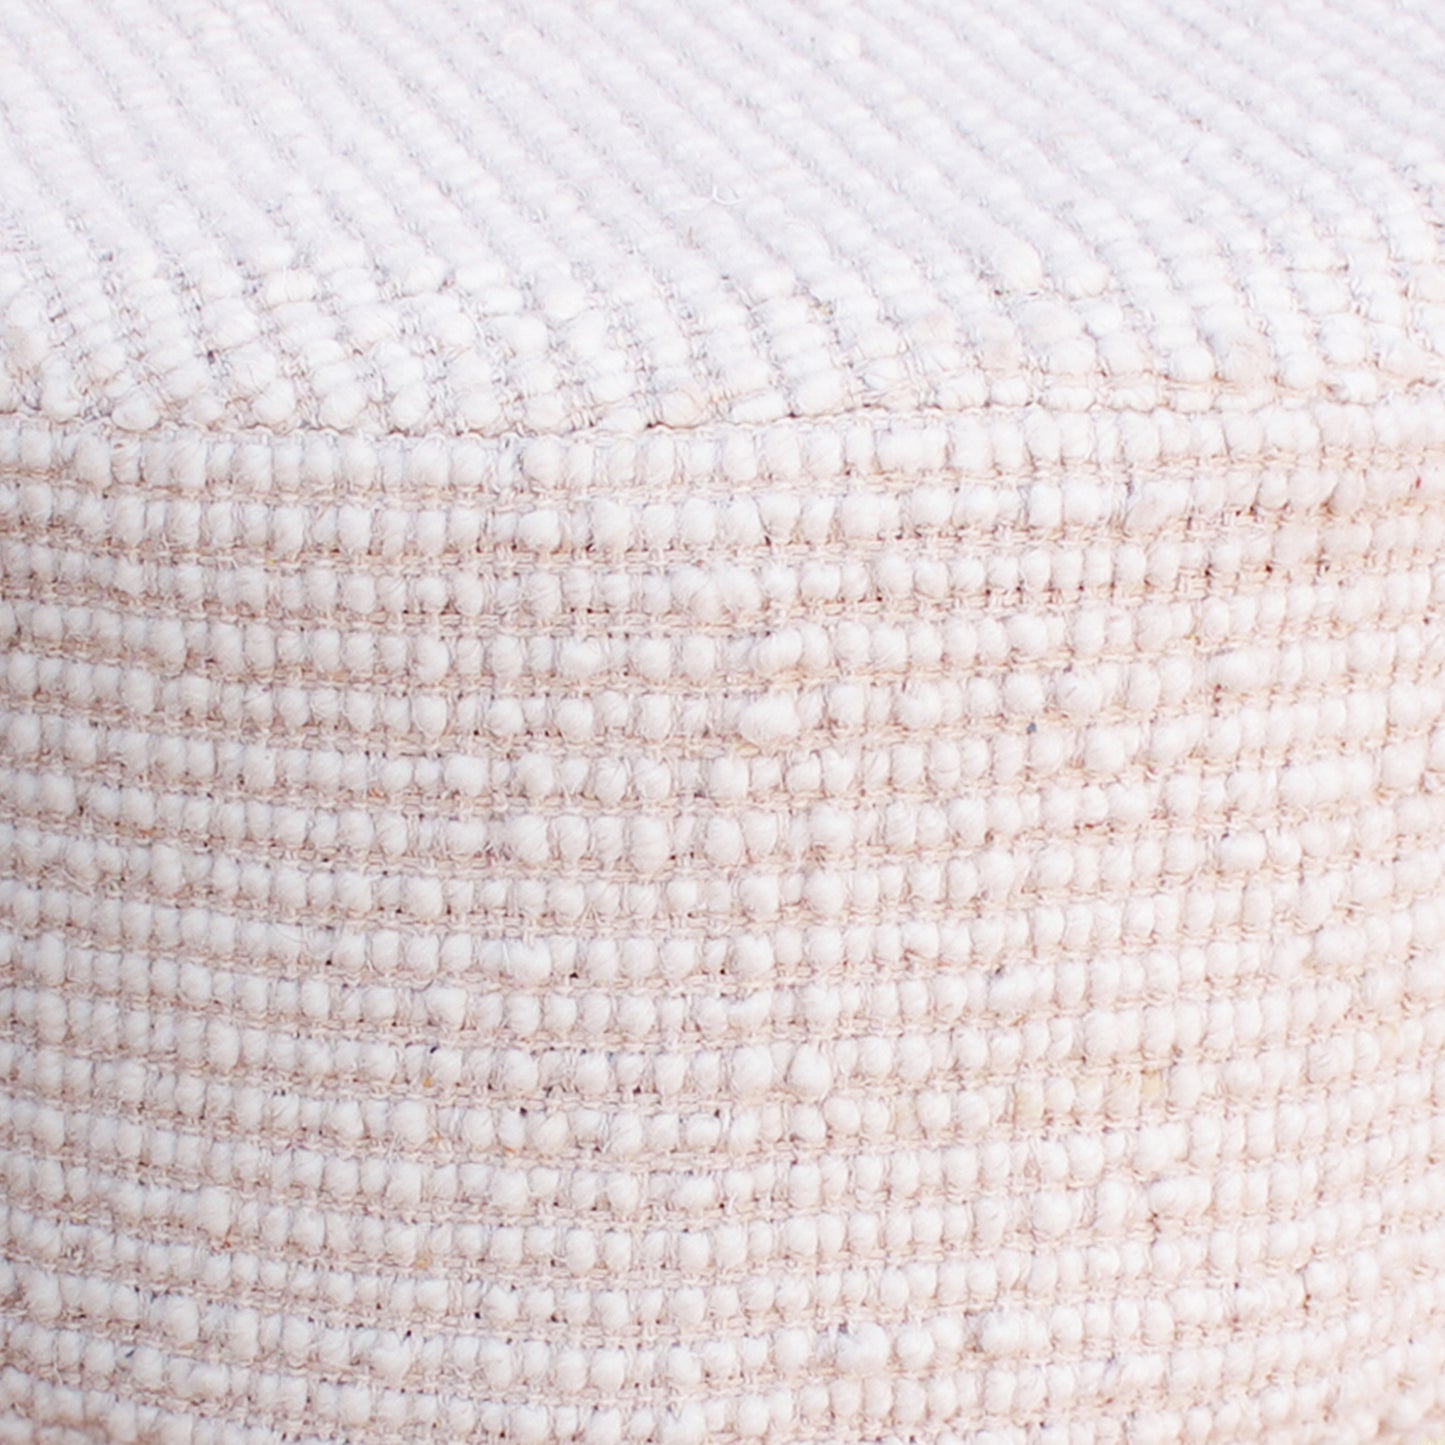 Spike Stool, 40x40x40 cm, Natural White, Wool, Hand Woven, Handwoven, All Loop